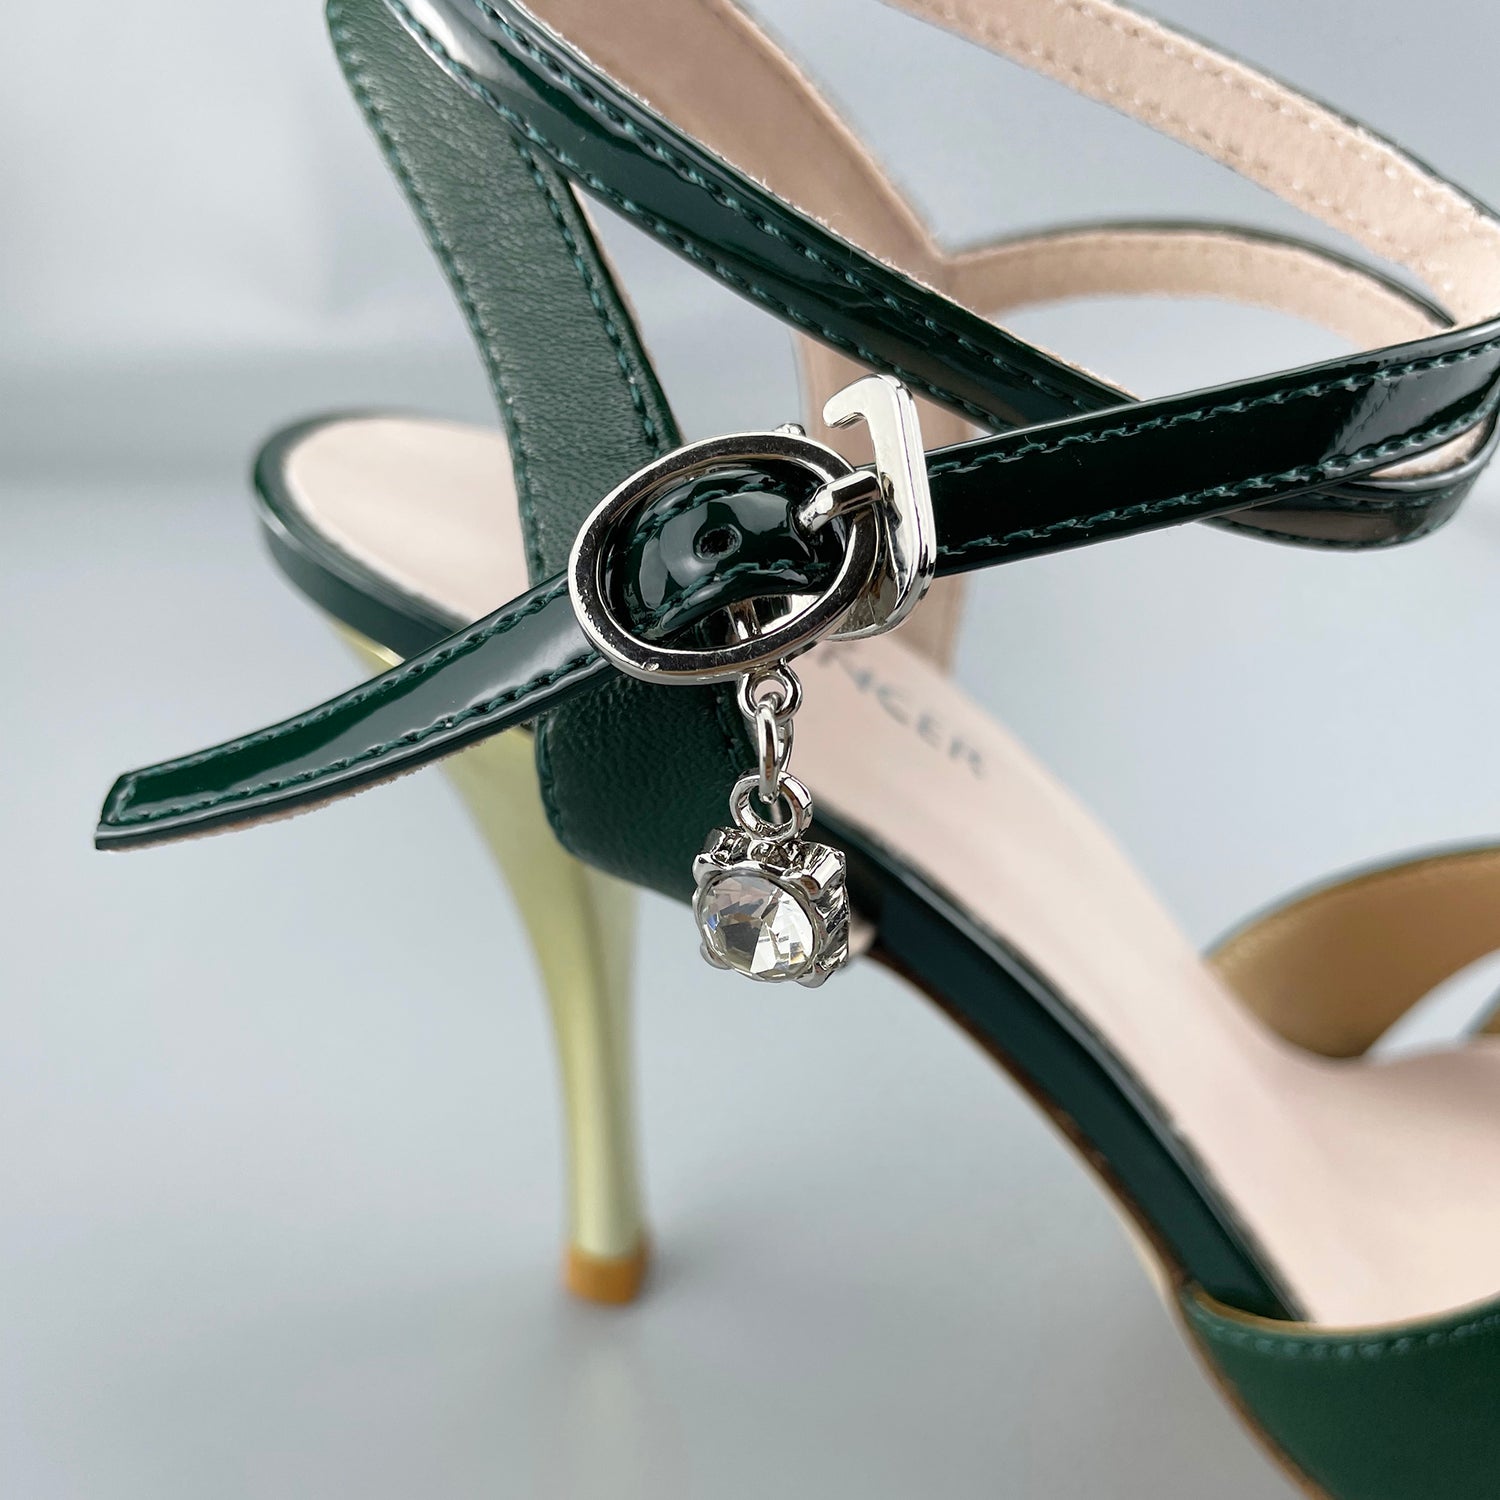 Pro Dancer Peep-toe Argentine Tango Shoes with Closed-back High Heels and Hard Leather Sole in Green7